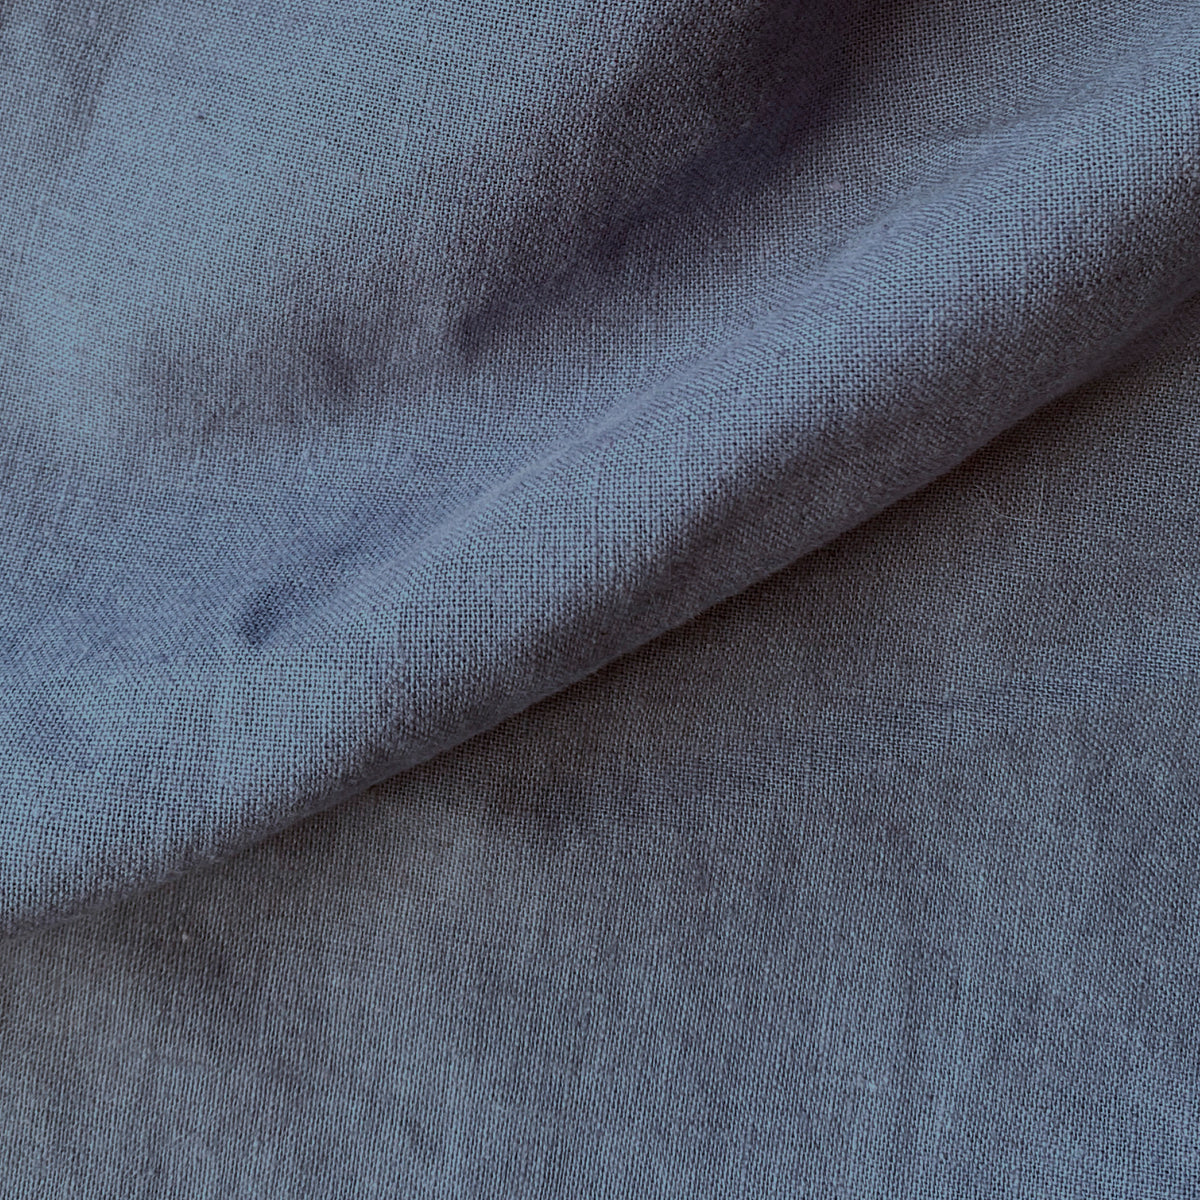 Close-up image of Catalina Blue Blended Linen